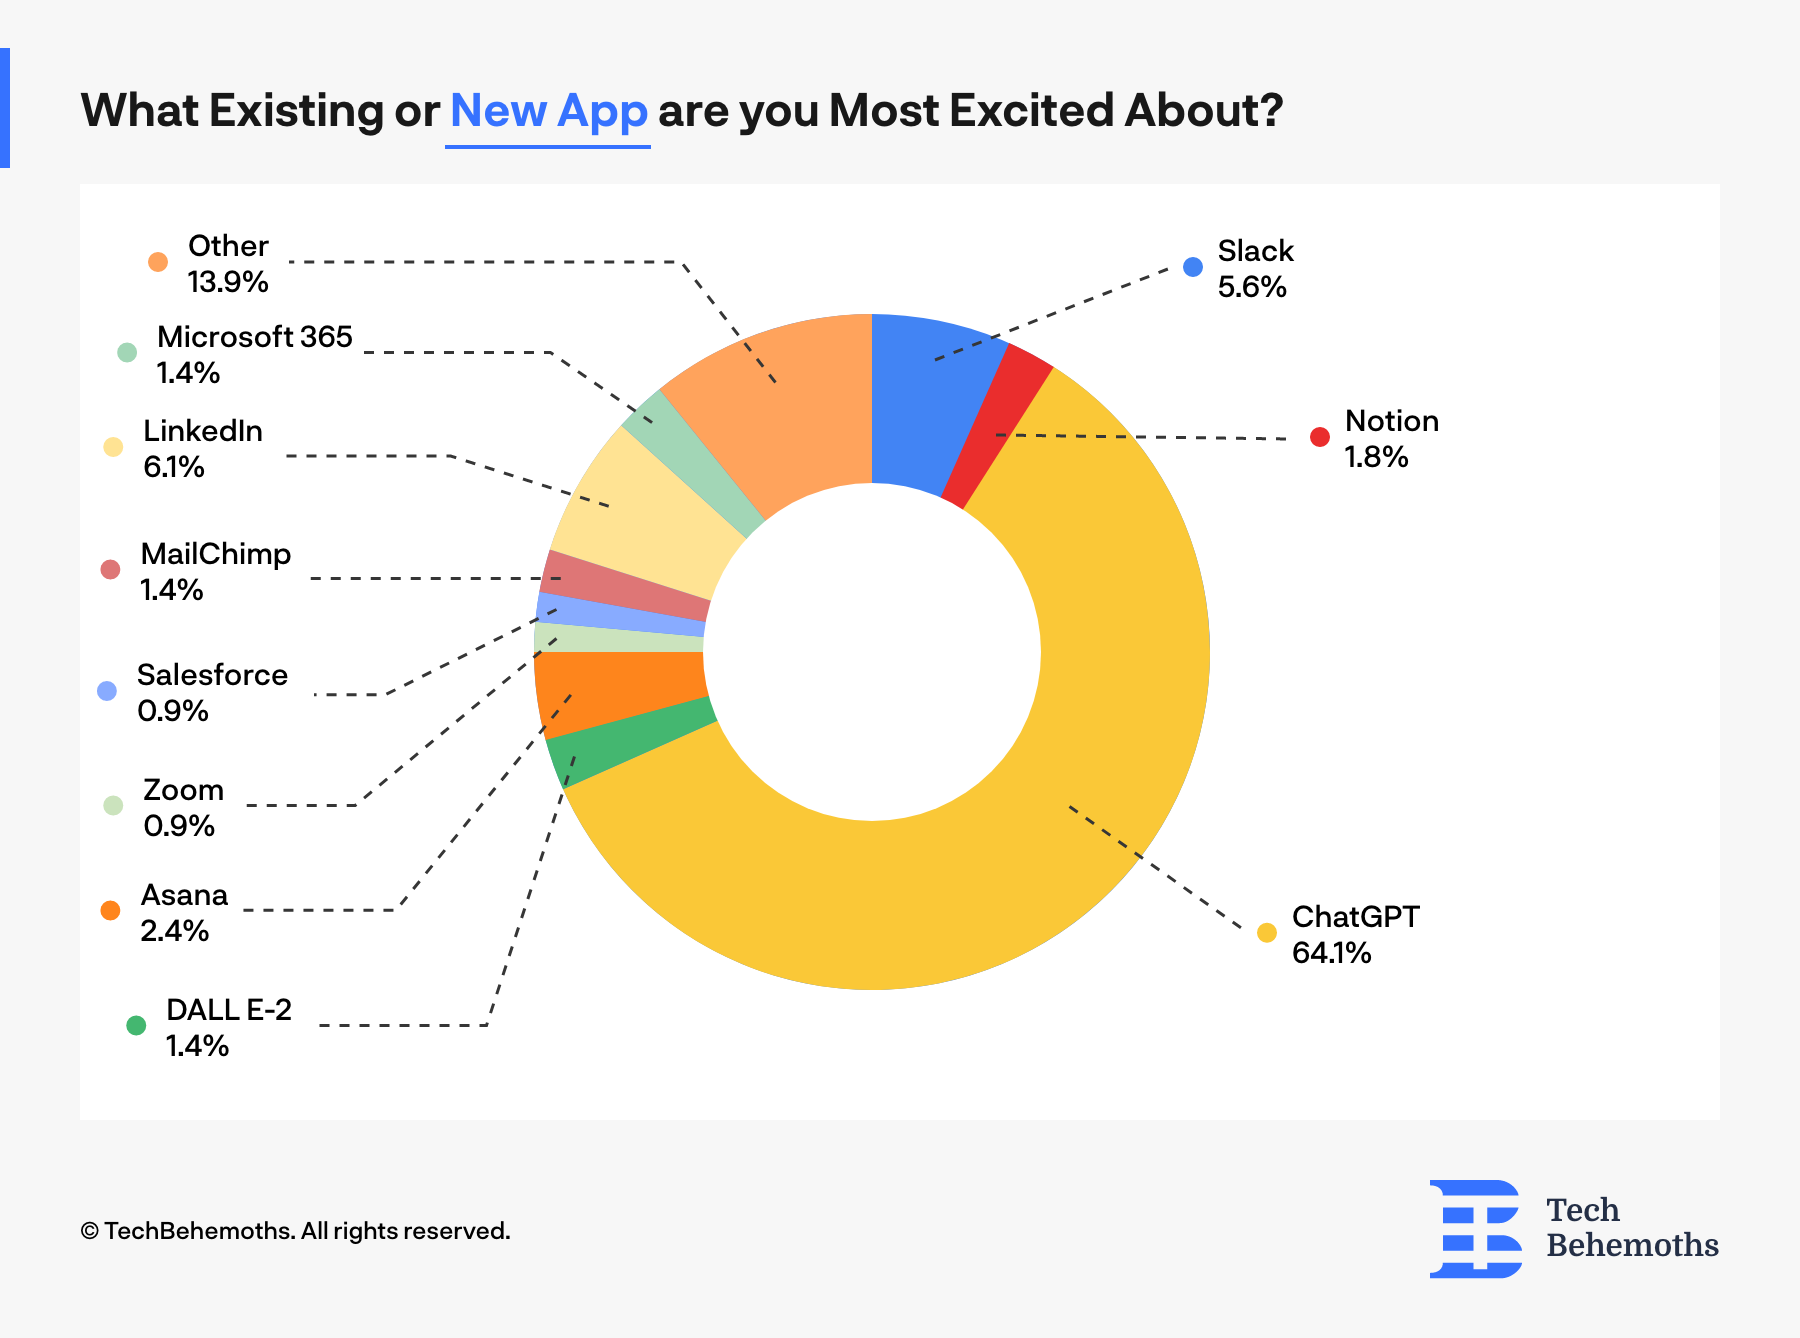 most of IT companies consider ChatGPT as the most exciting app in today's web